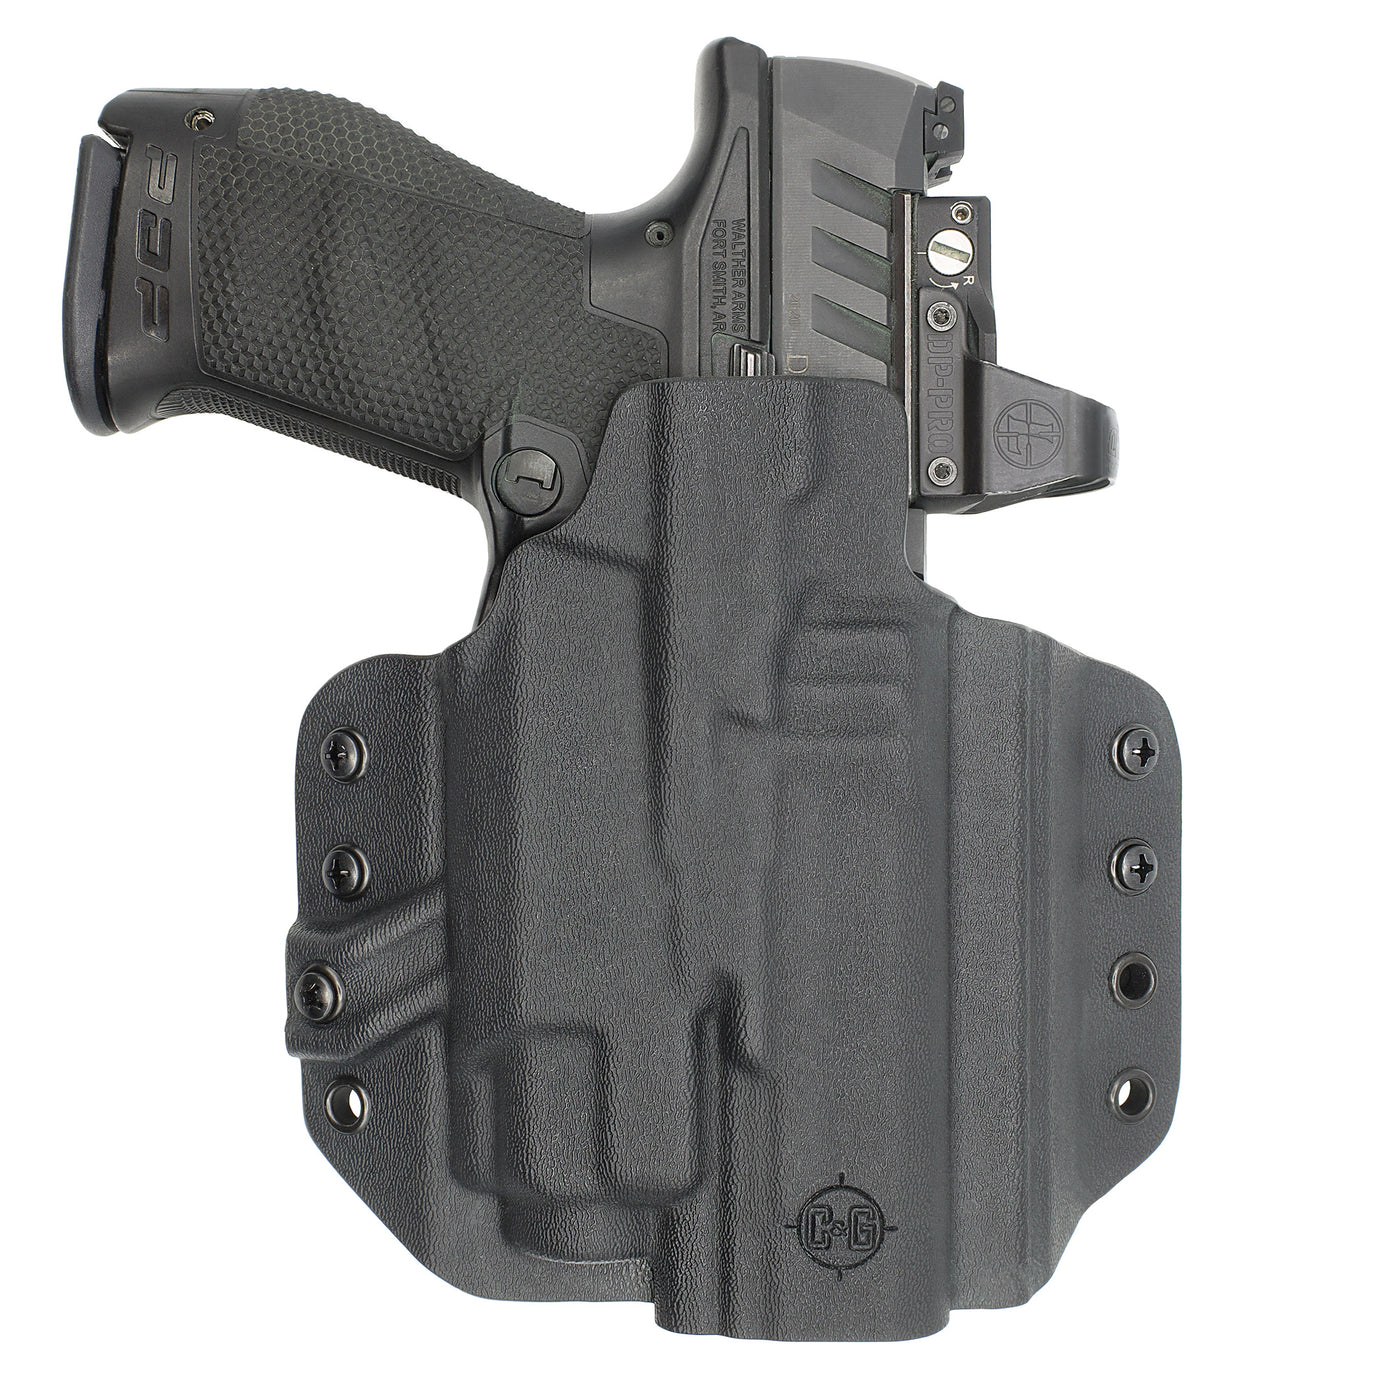 C&G Holsters custom OWB Tactical CZ P07/P09 Streamlight TLR8 holstered